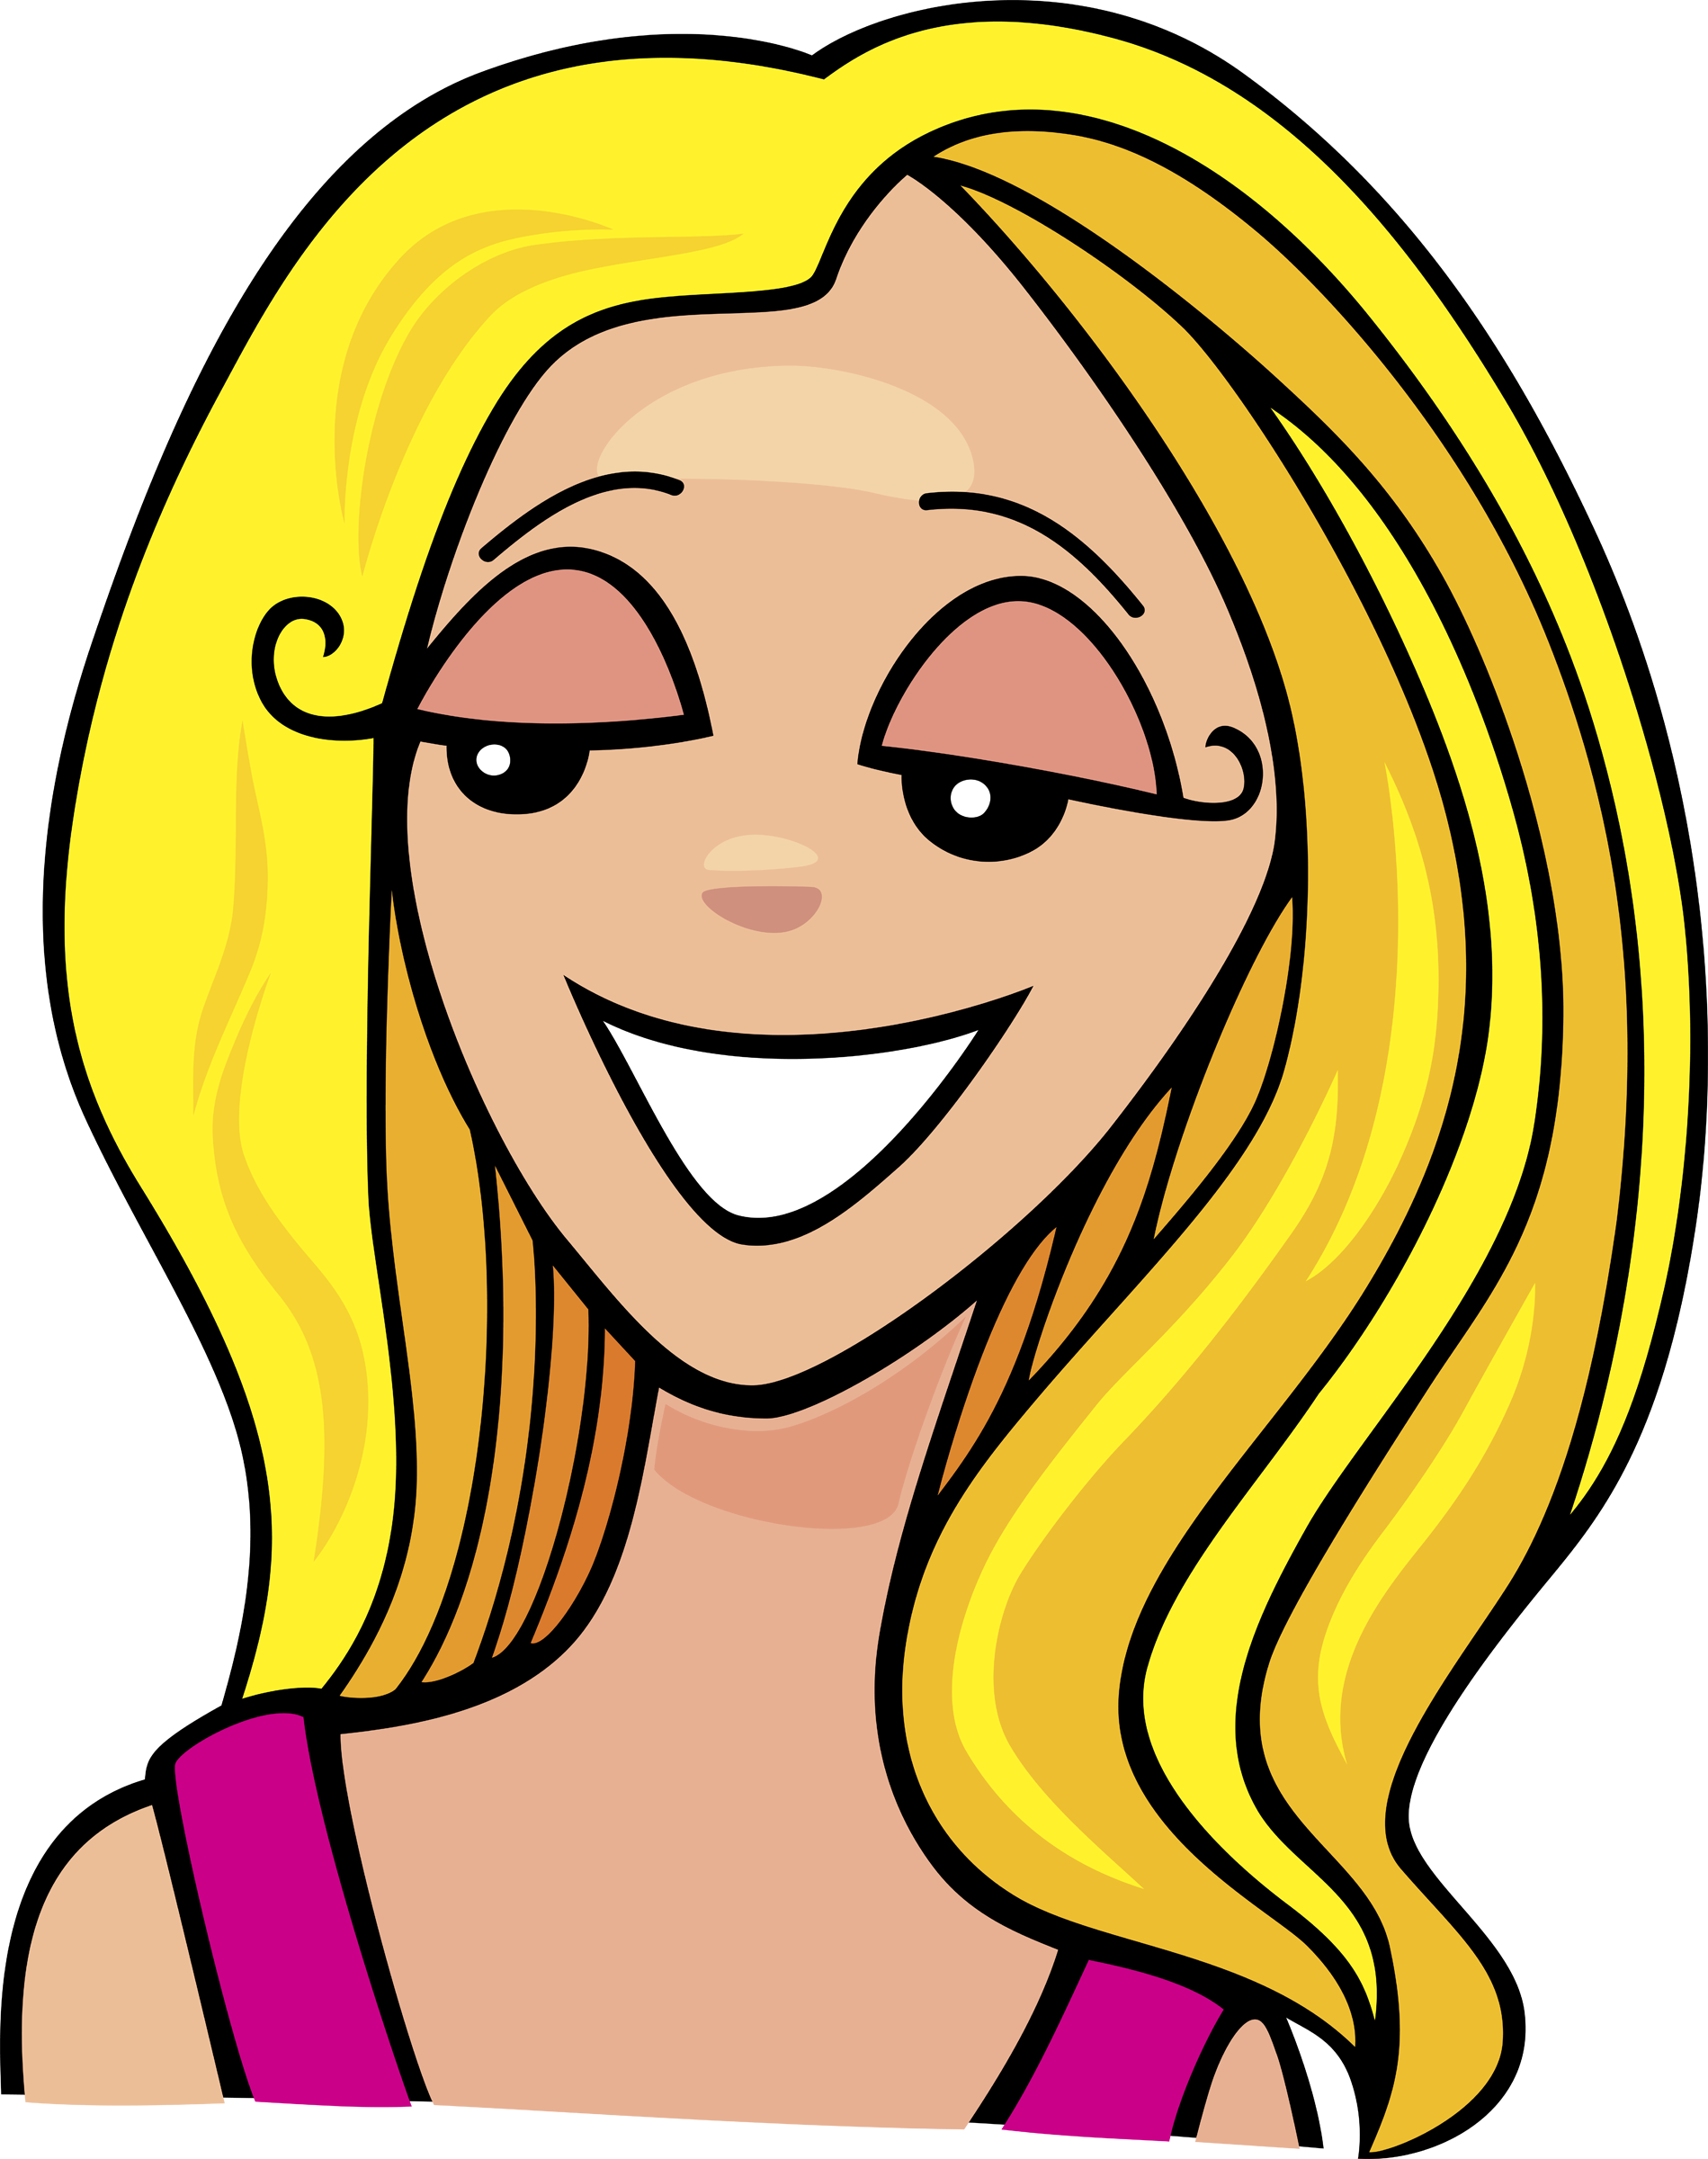 Free Blonde Hair Cliparts Download Free Blonde Hair Cliparts Png Images Free Cliparts On